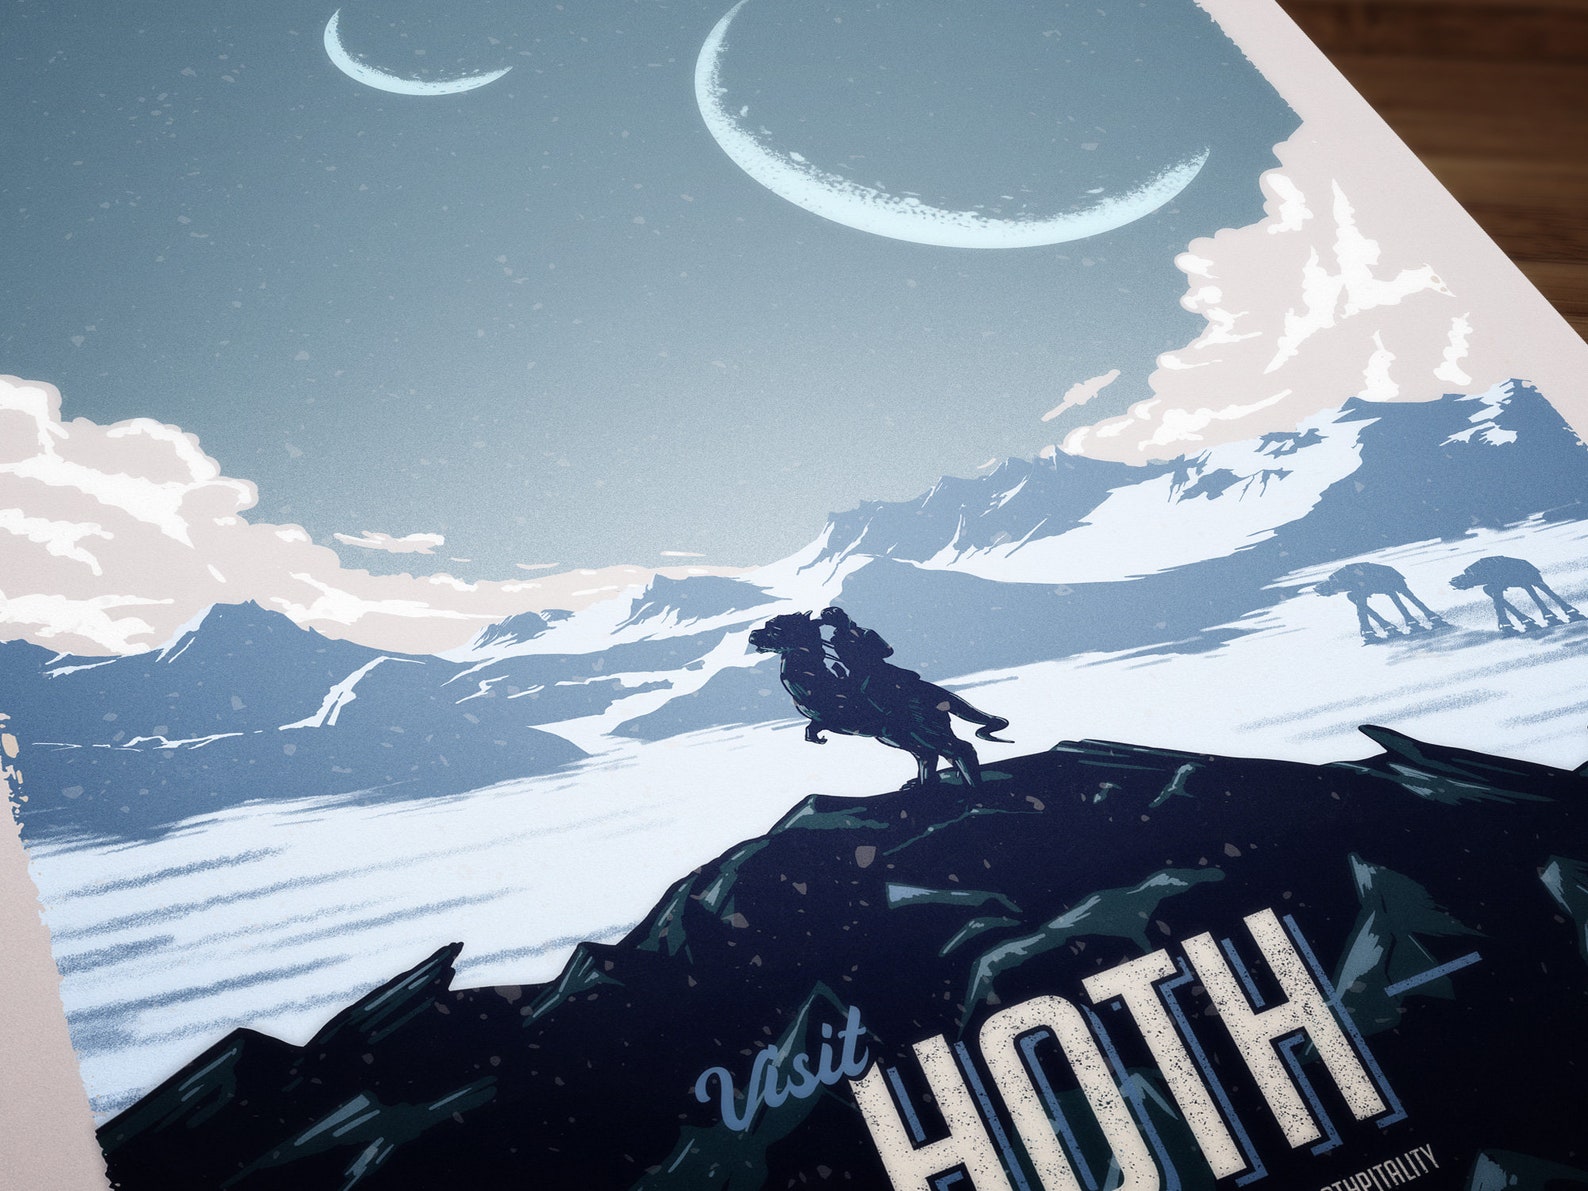 travel poster hoth